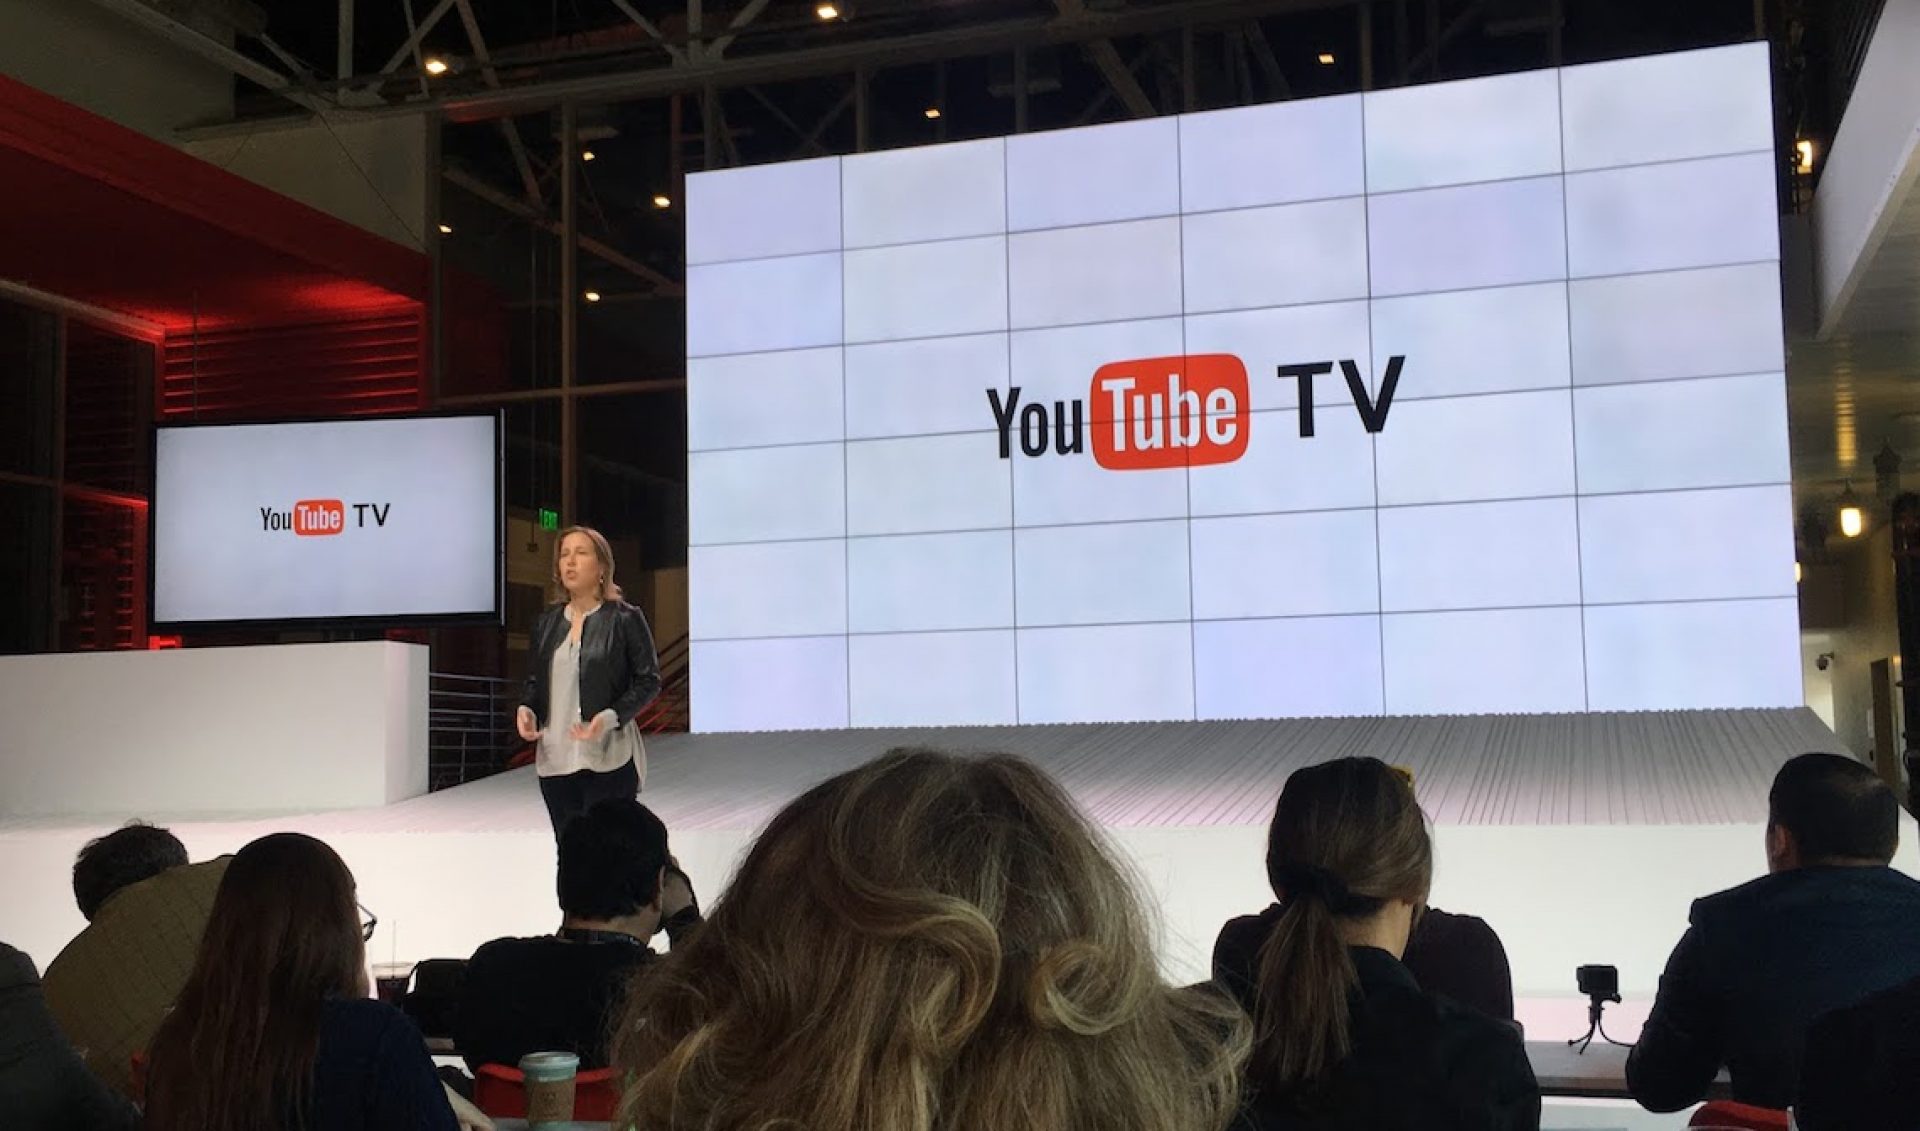 YouTube Reveals YouTube TV, A $35 Bundle Of Live TV Channels With Unlimited DVR